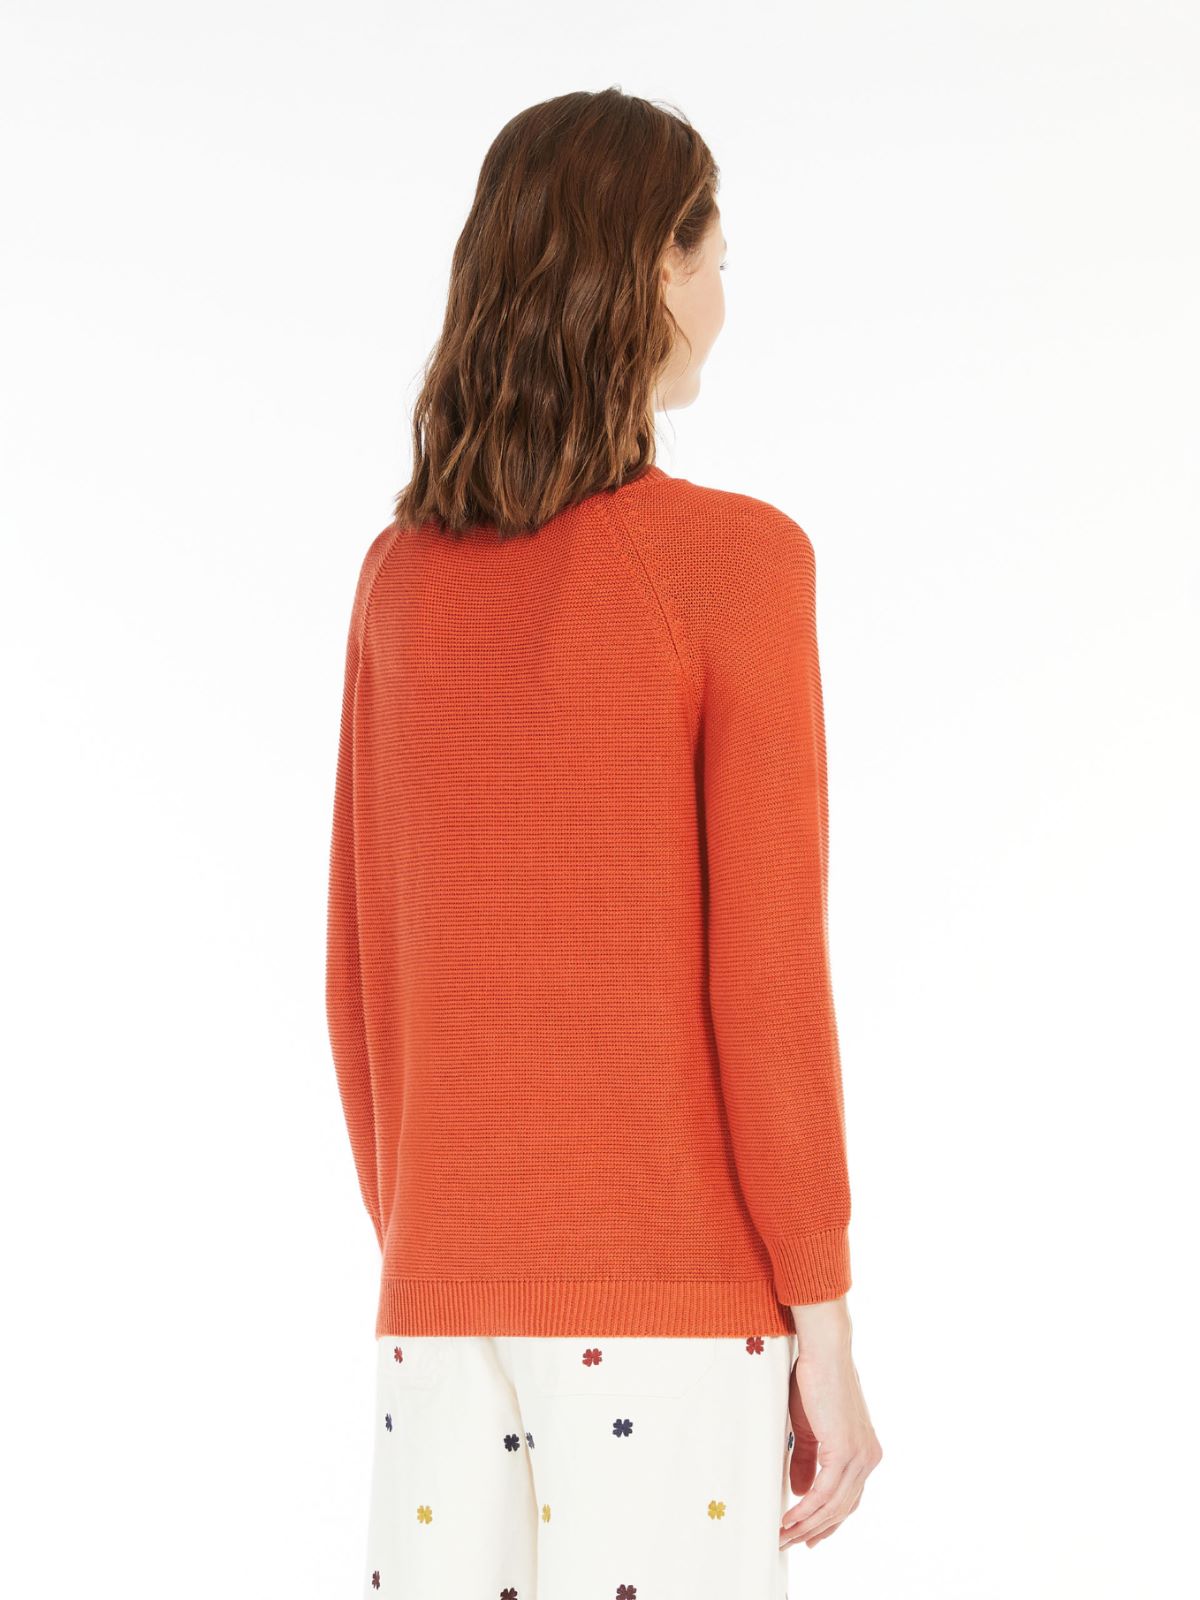 Relaxed-fit cotton sweater - ORANGE - Weekend Max Mara - 3